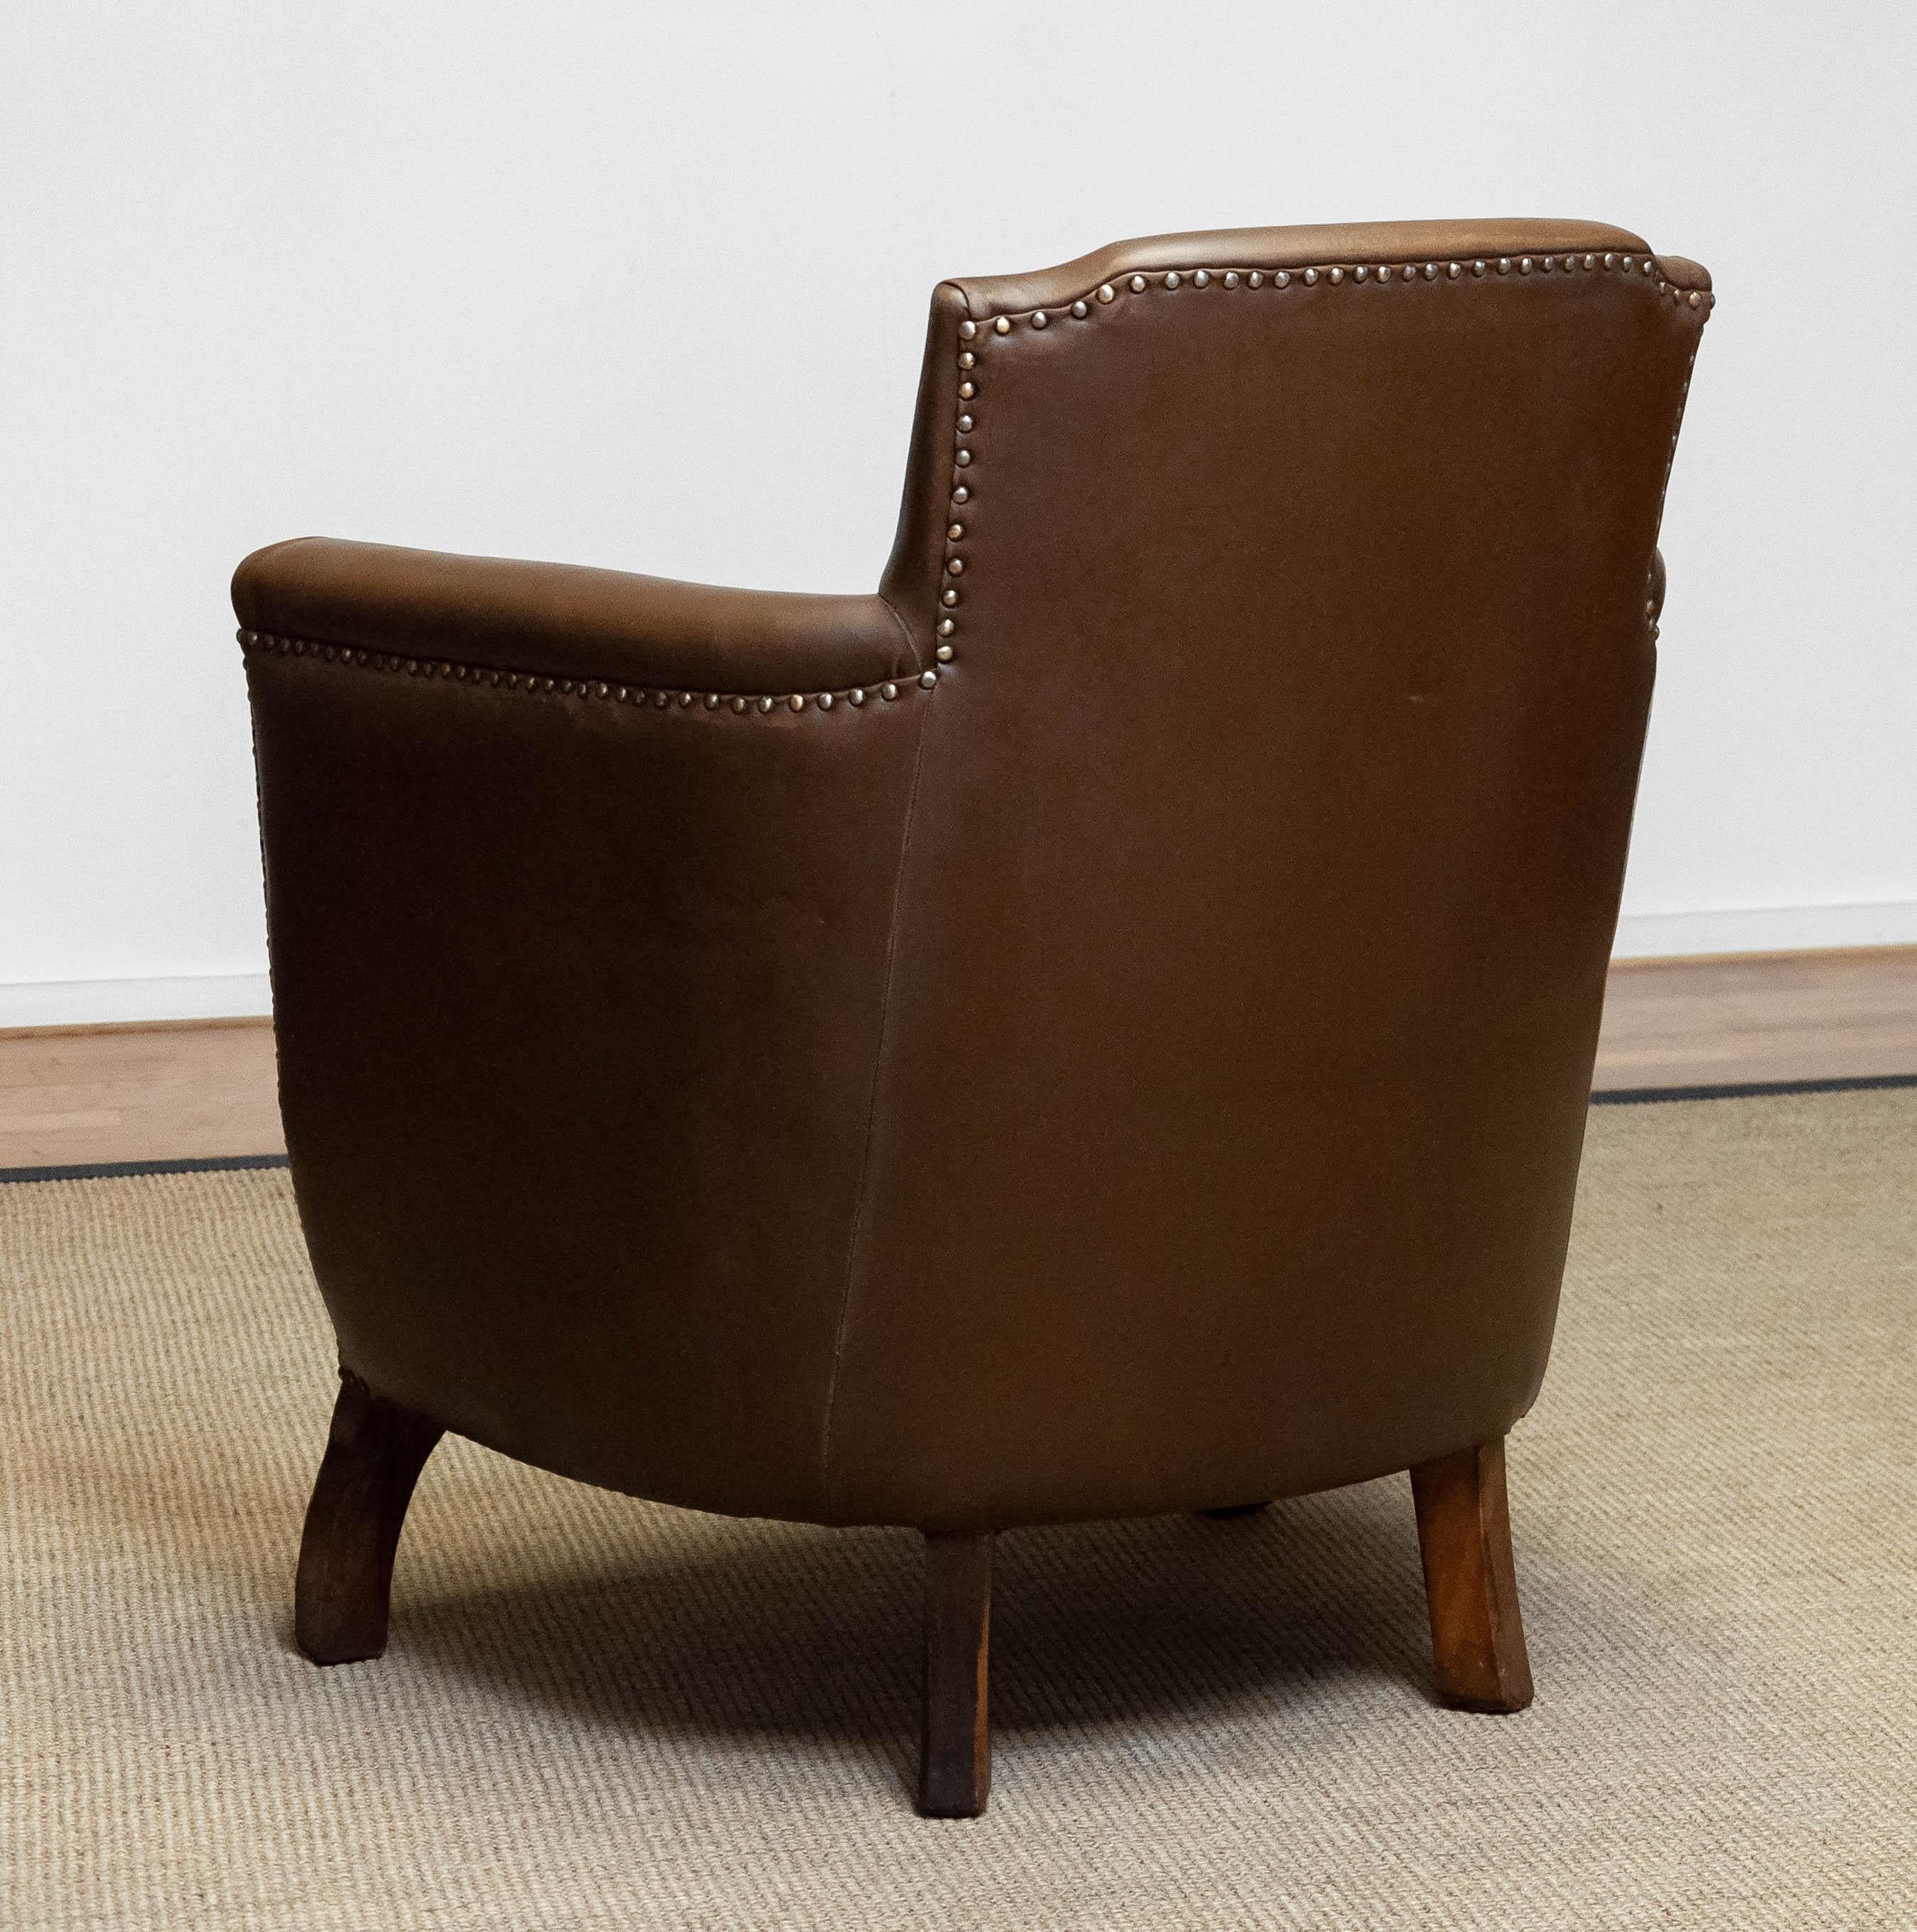 Metal 1930s Swedish Tan / Brown Nailed Leather Lounge Chair By Otto Schultz For Boet For Sale